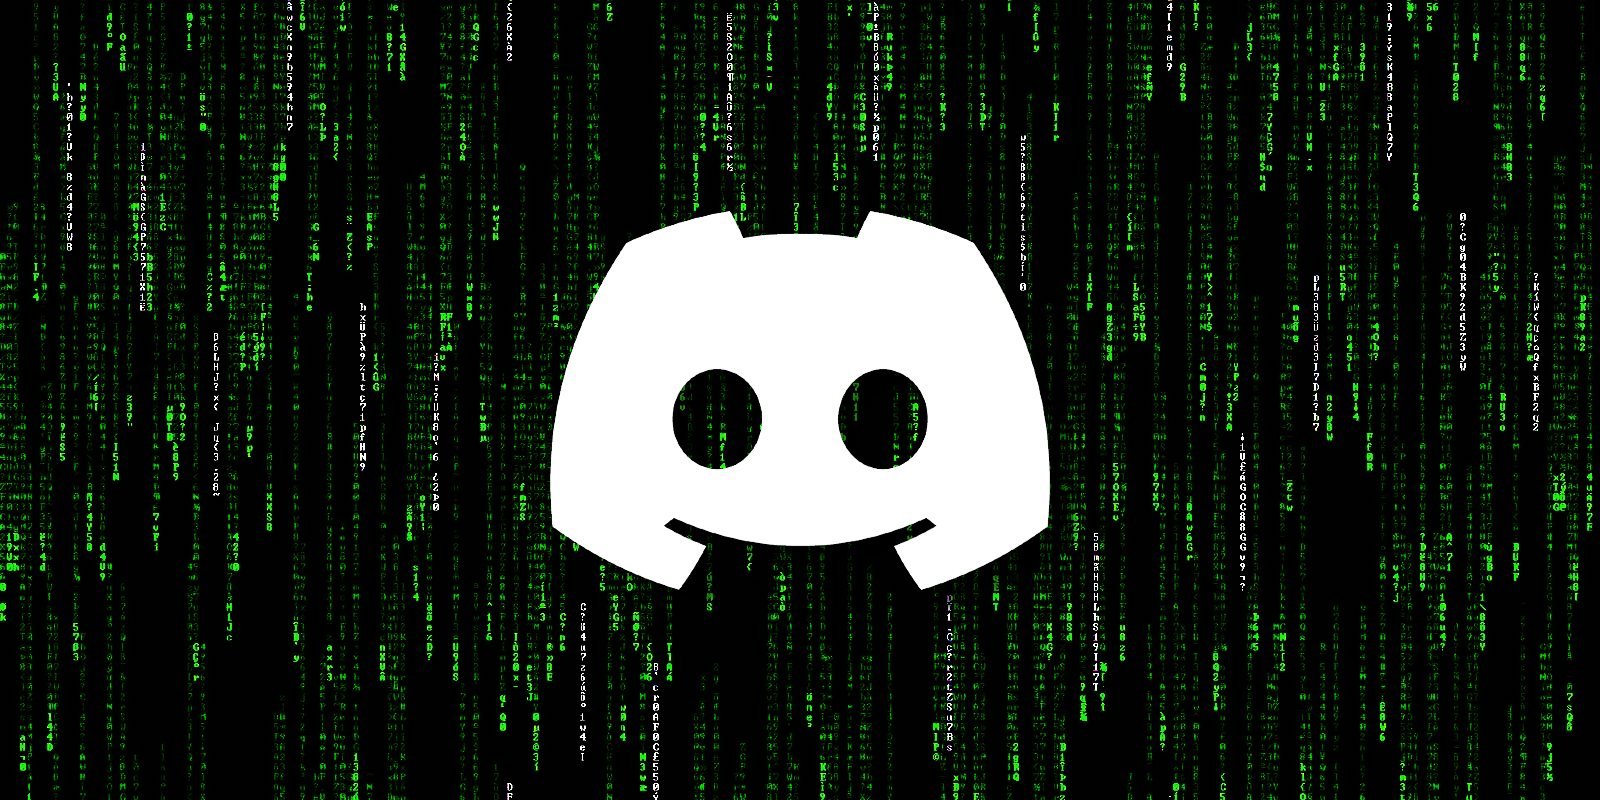 Discord suffered a data after third-party support agent was hacked